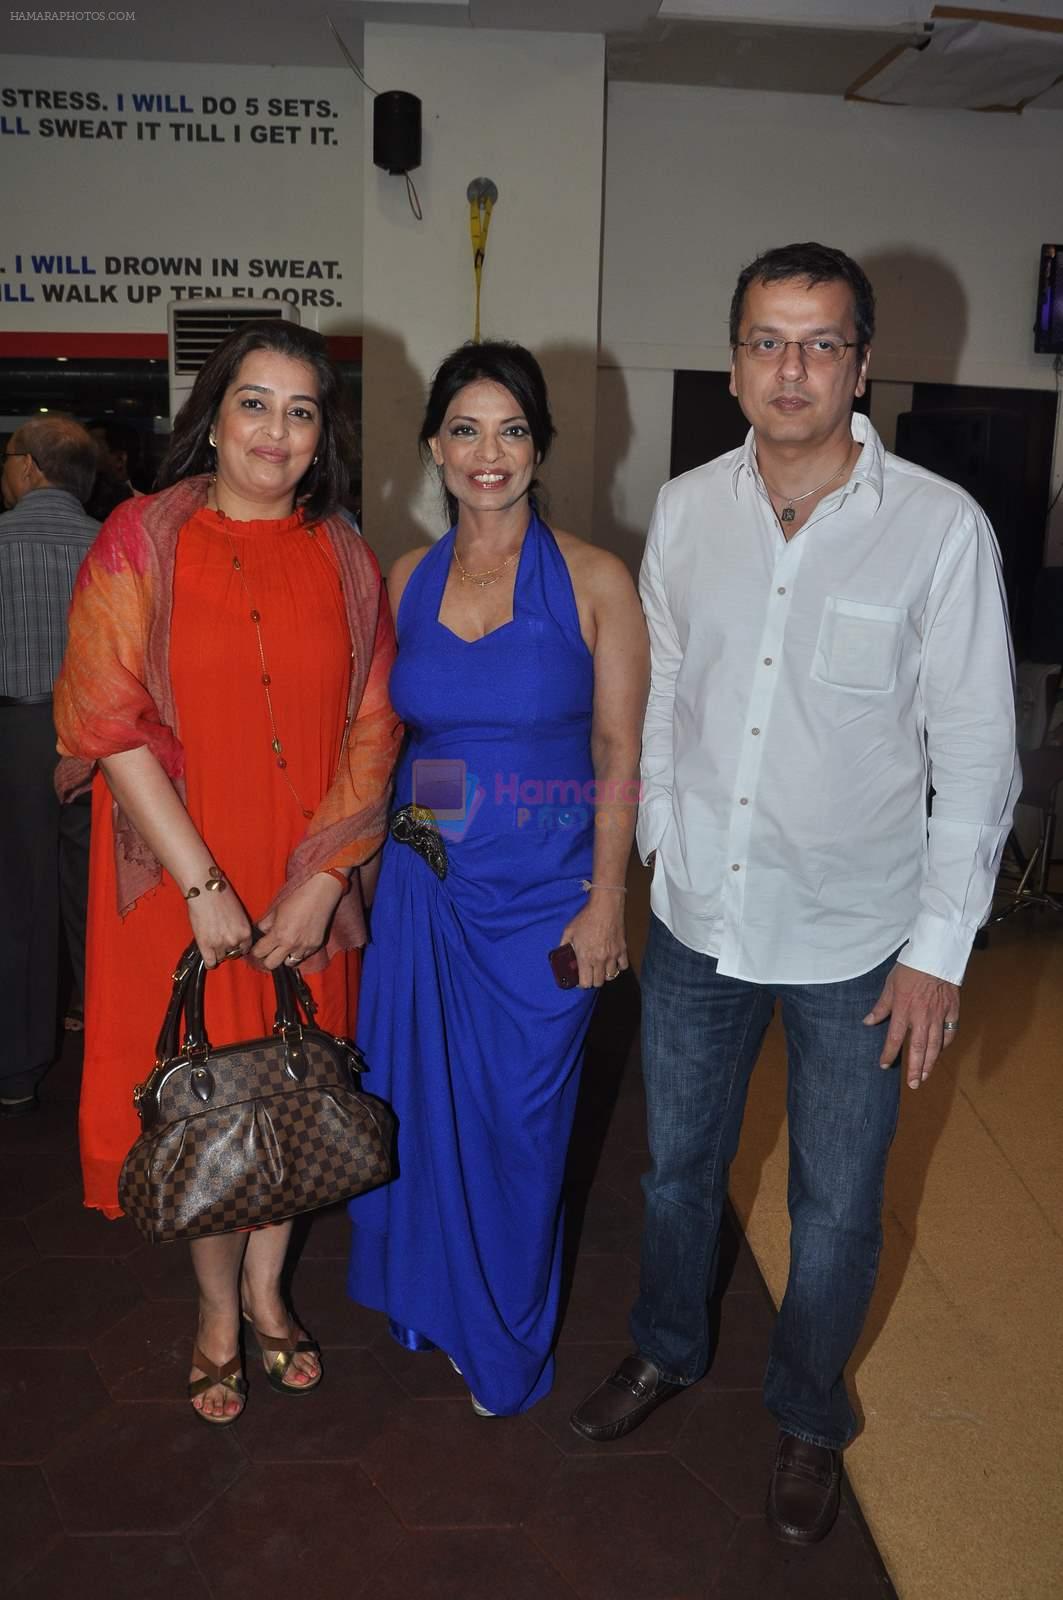 at the launch of Leena Mogre fitness book in Bandra, Mumbai on 30th April 2015